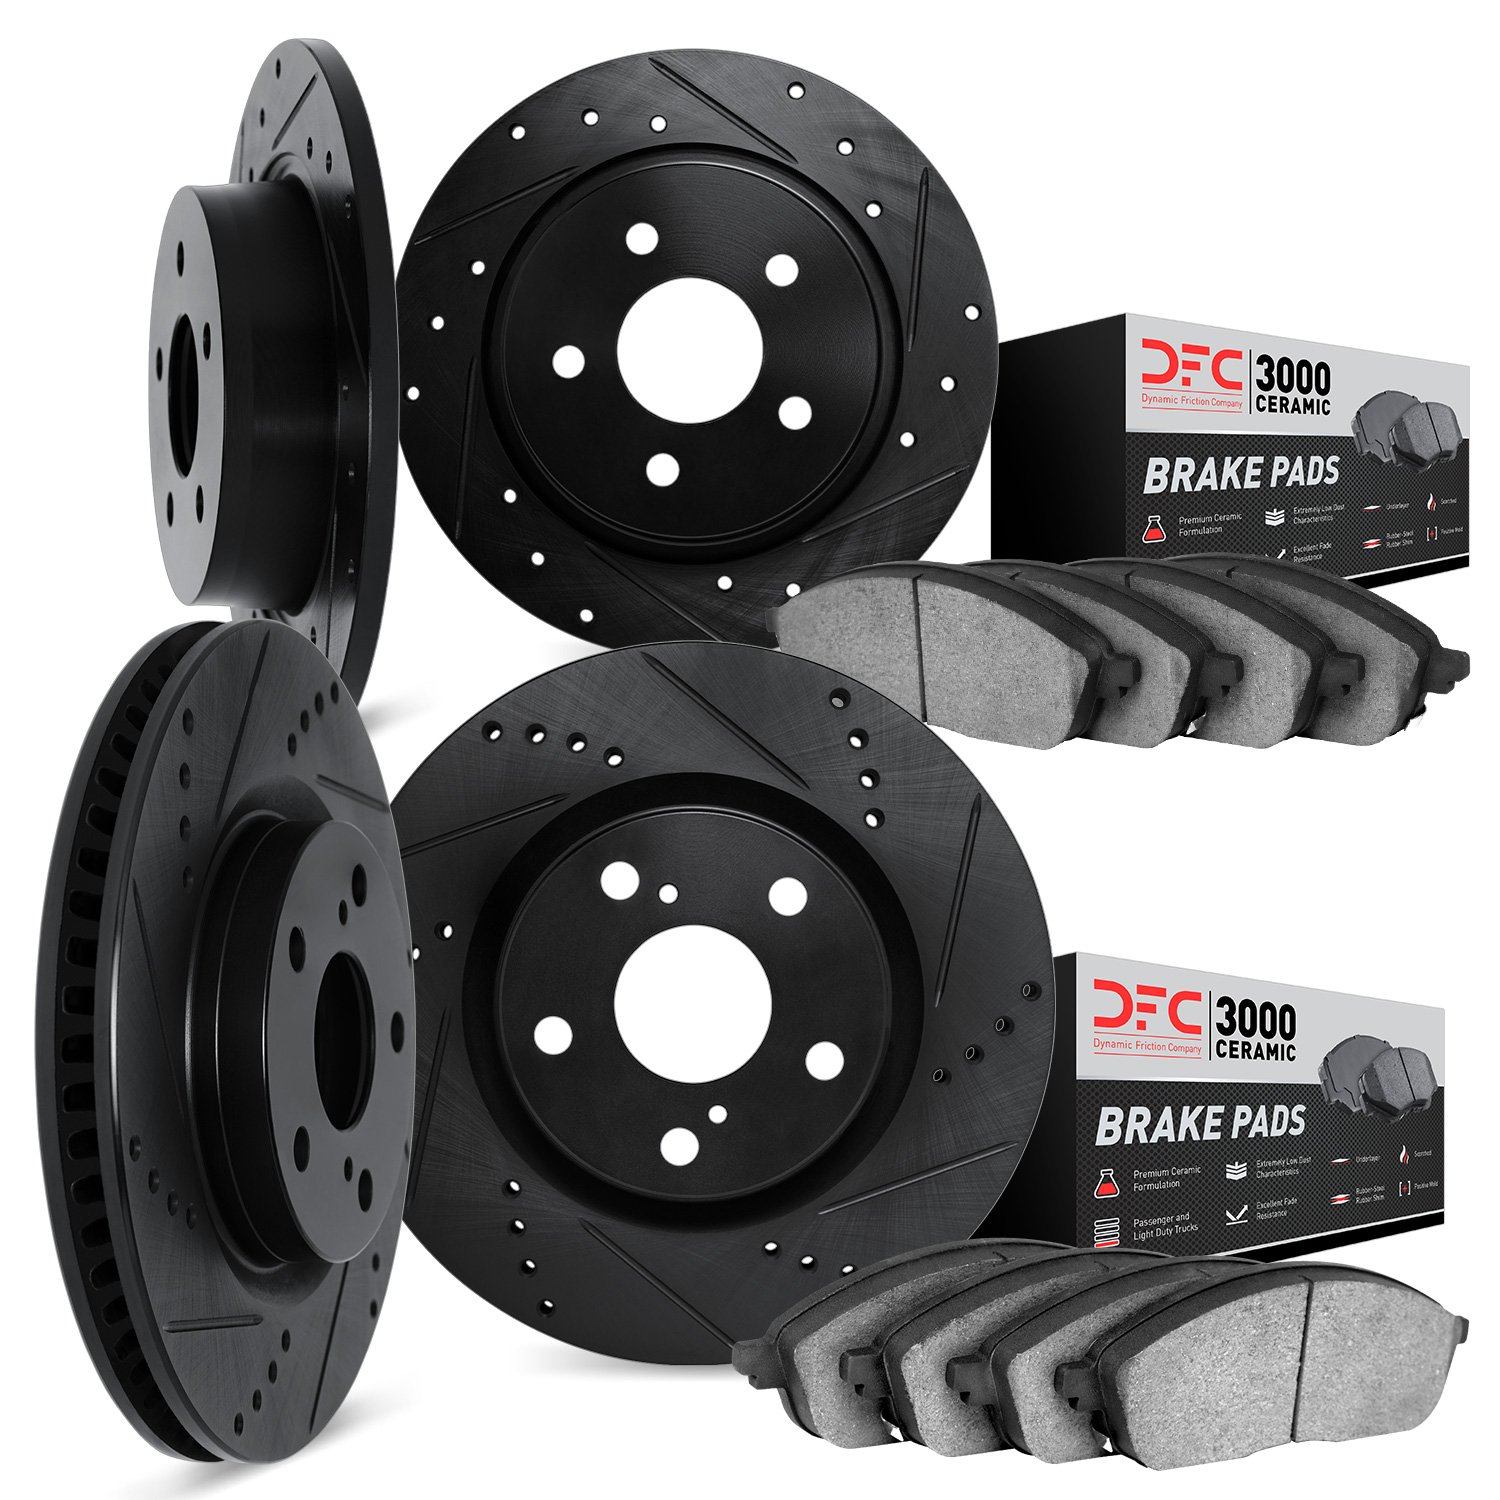 8304-39015 Drilled/Slotted Brake Rotors with 3000-Series Ceramic Brake Pads Kit [Black], 2001-2006 Mopar, Position: Front and Re